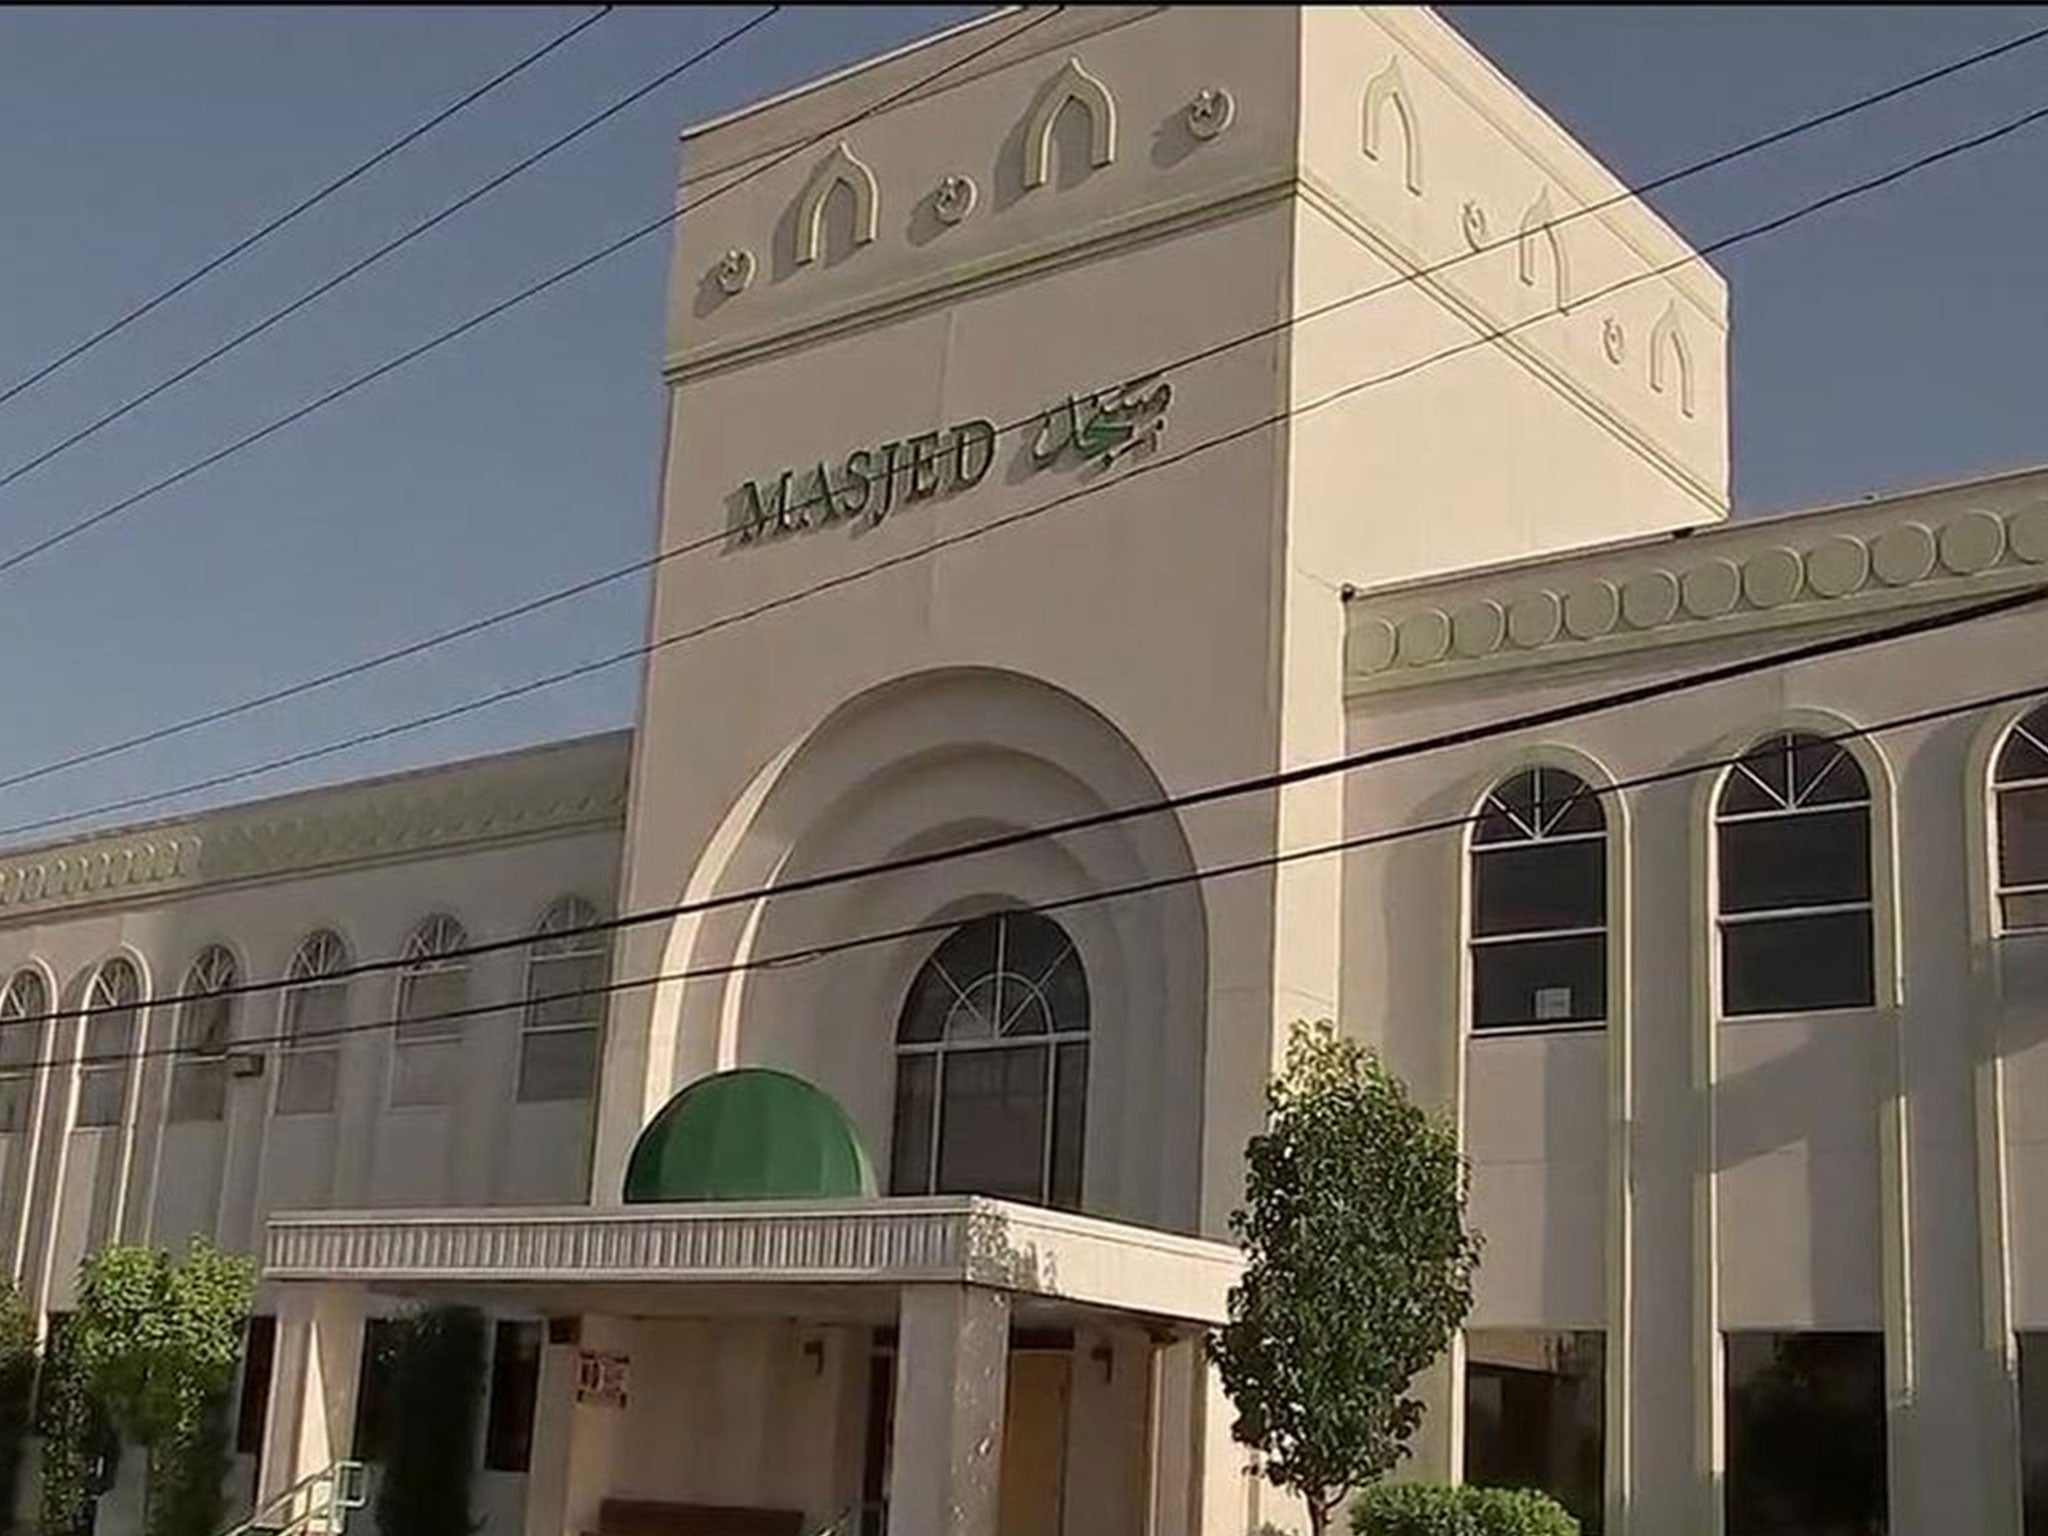 The victim was shot outside the mosque near Bellaire, in Houston Texas